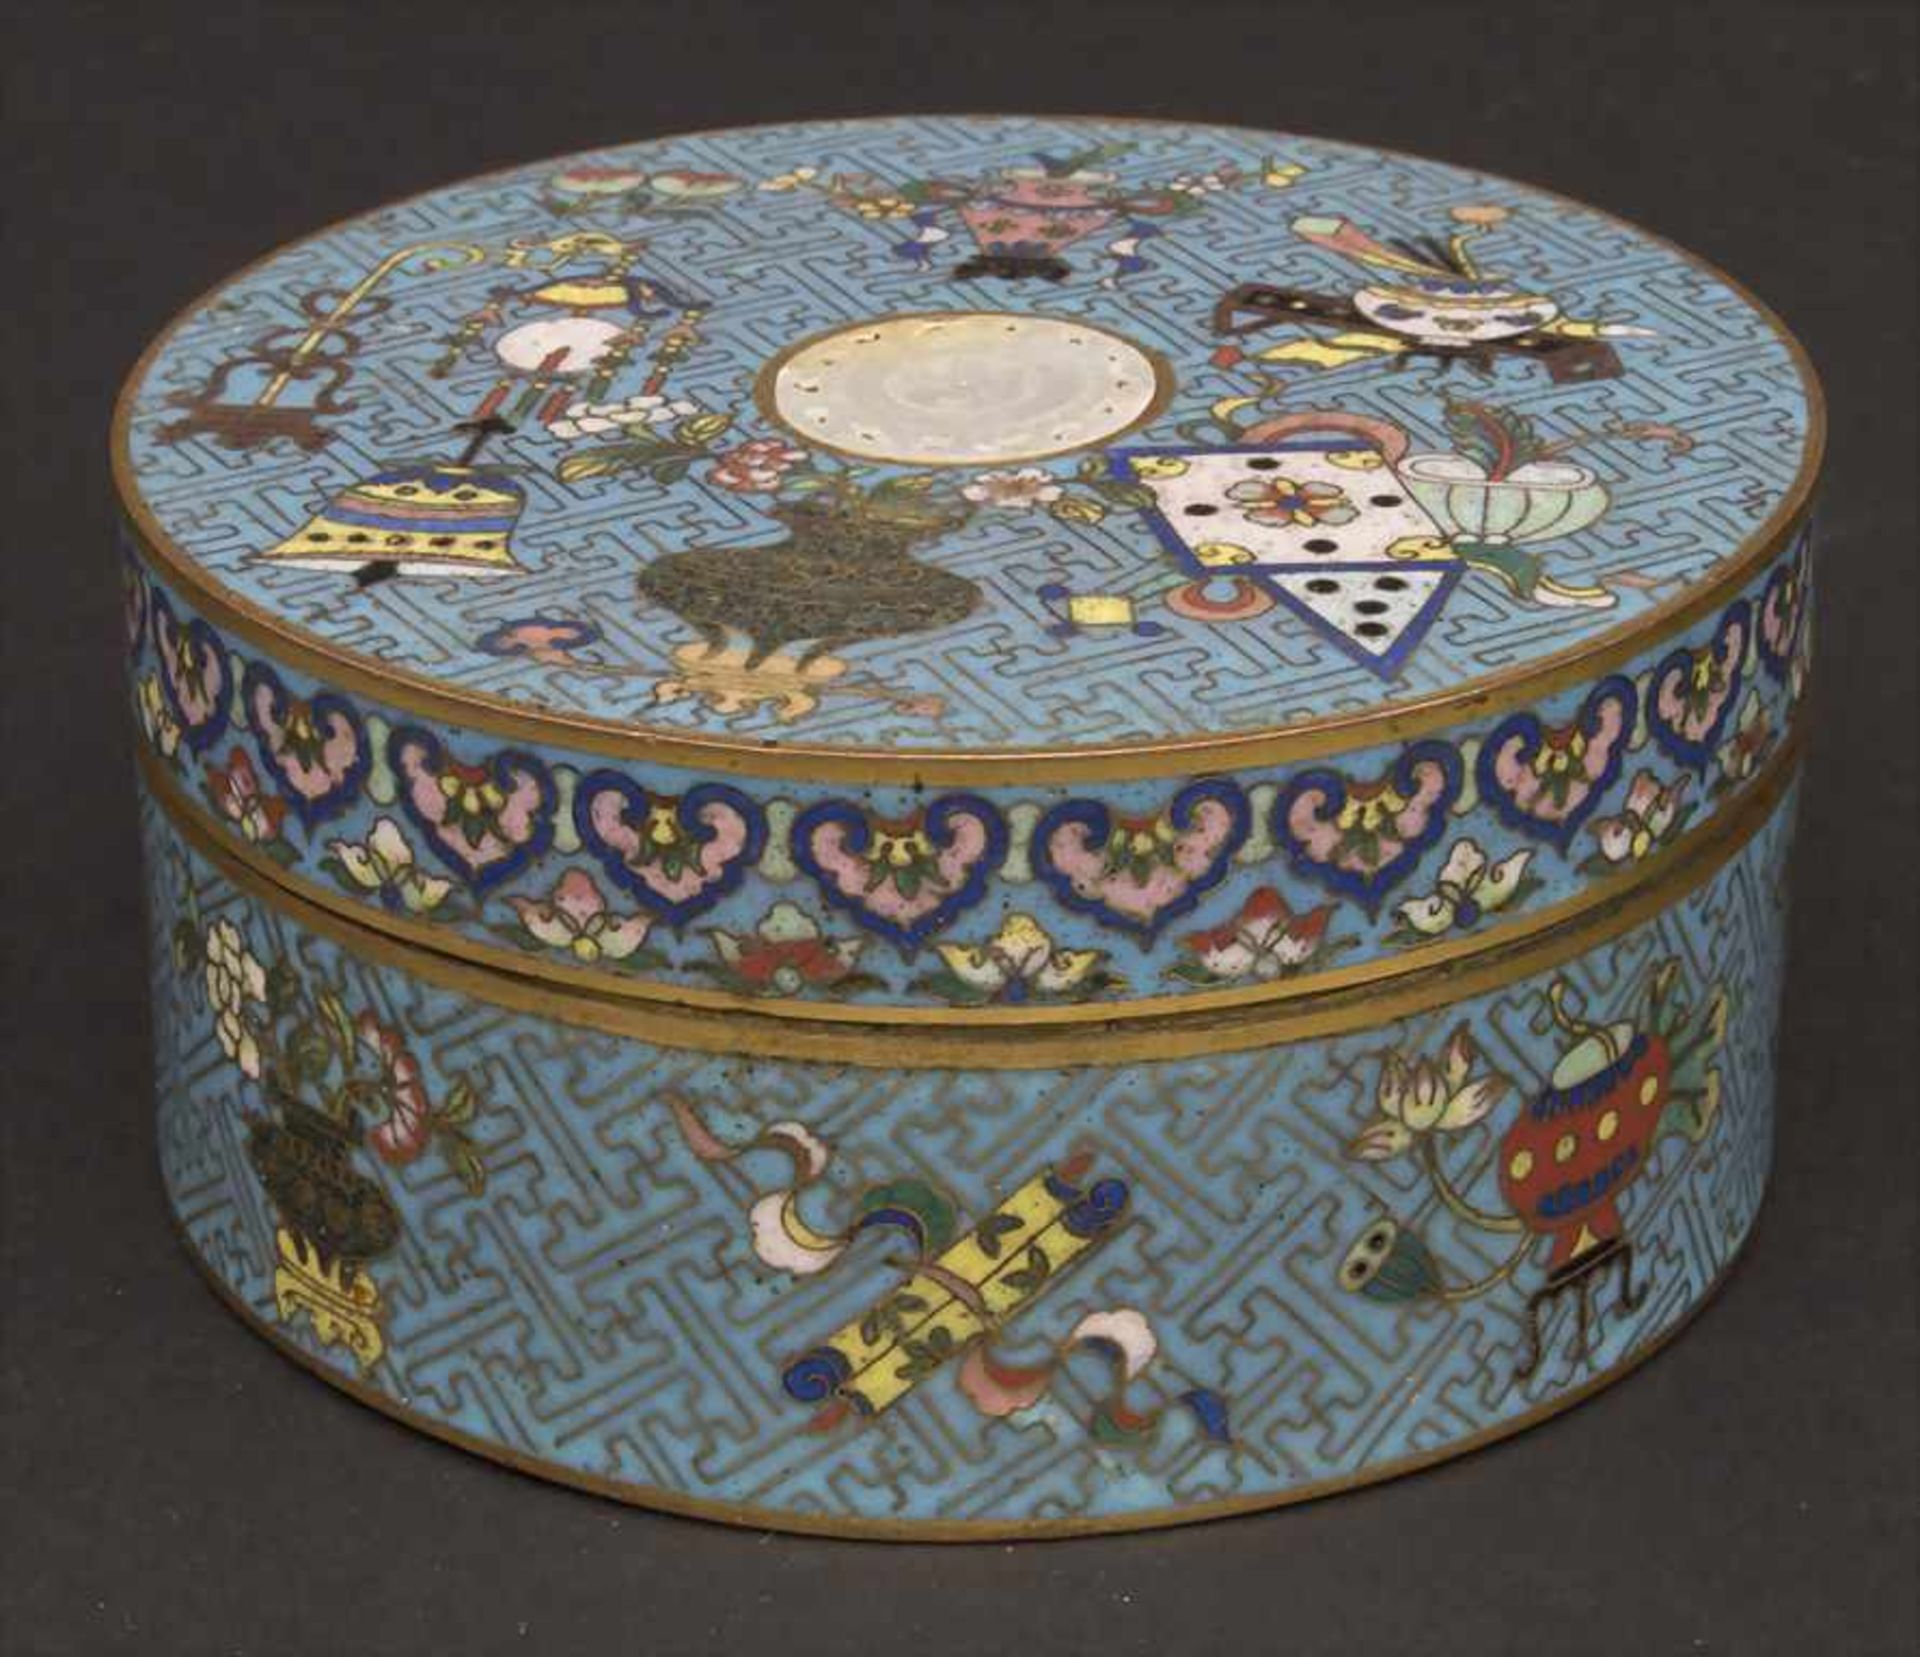 Cloisonné-Deckeldose, China, Qing-Dynastie, 18./19. Jh.< - Image 2 of 7